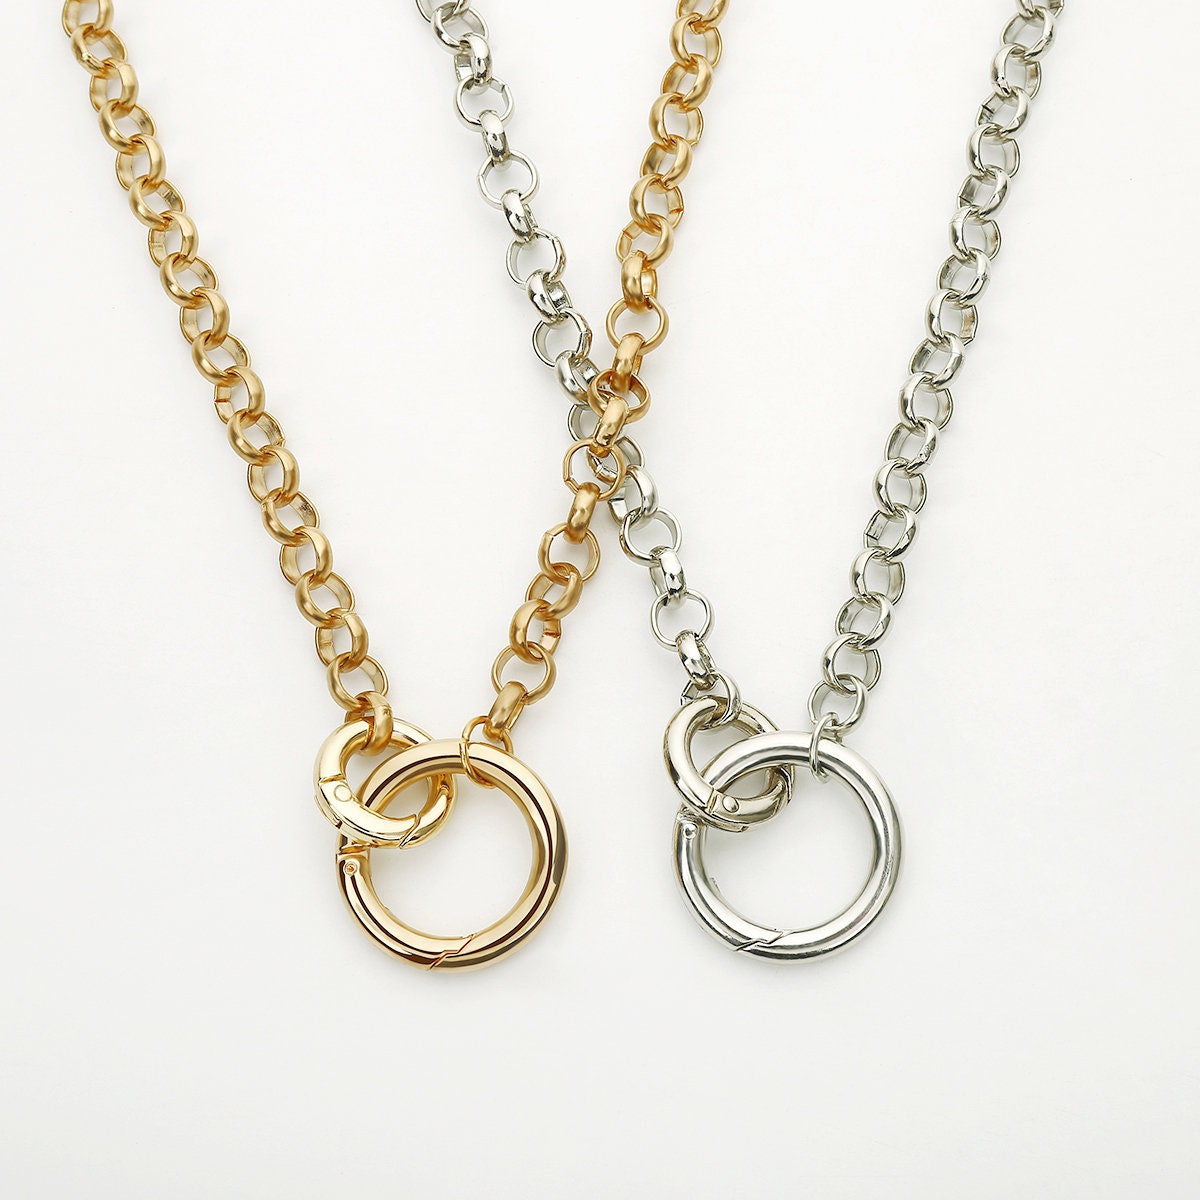 Minimalist Twisted Ring Pendant Necklace Entwined Ring Choker Necklace Statement Chain Necklace